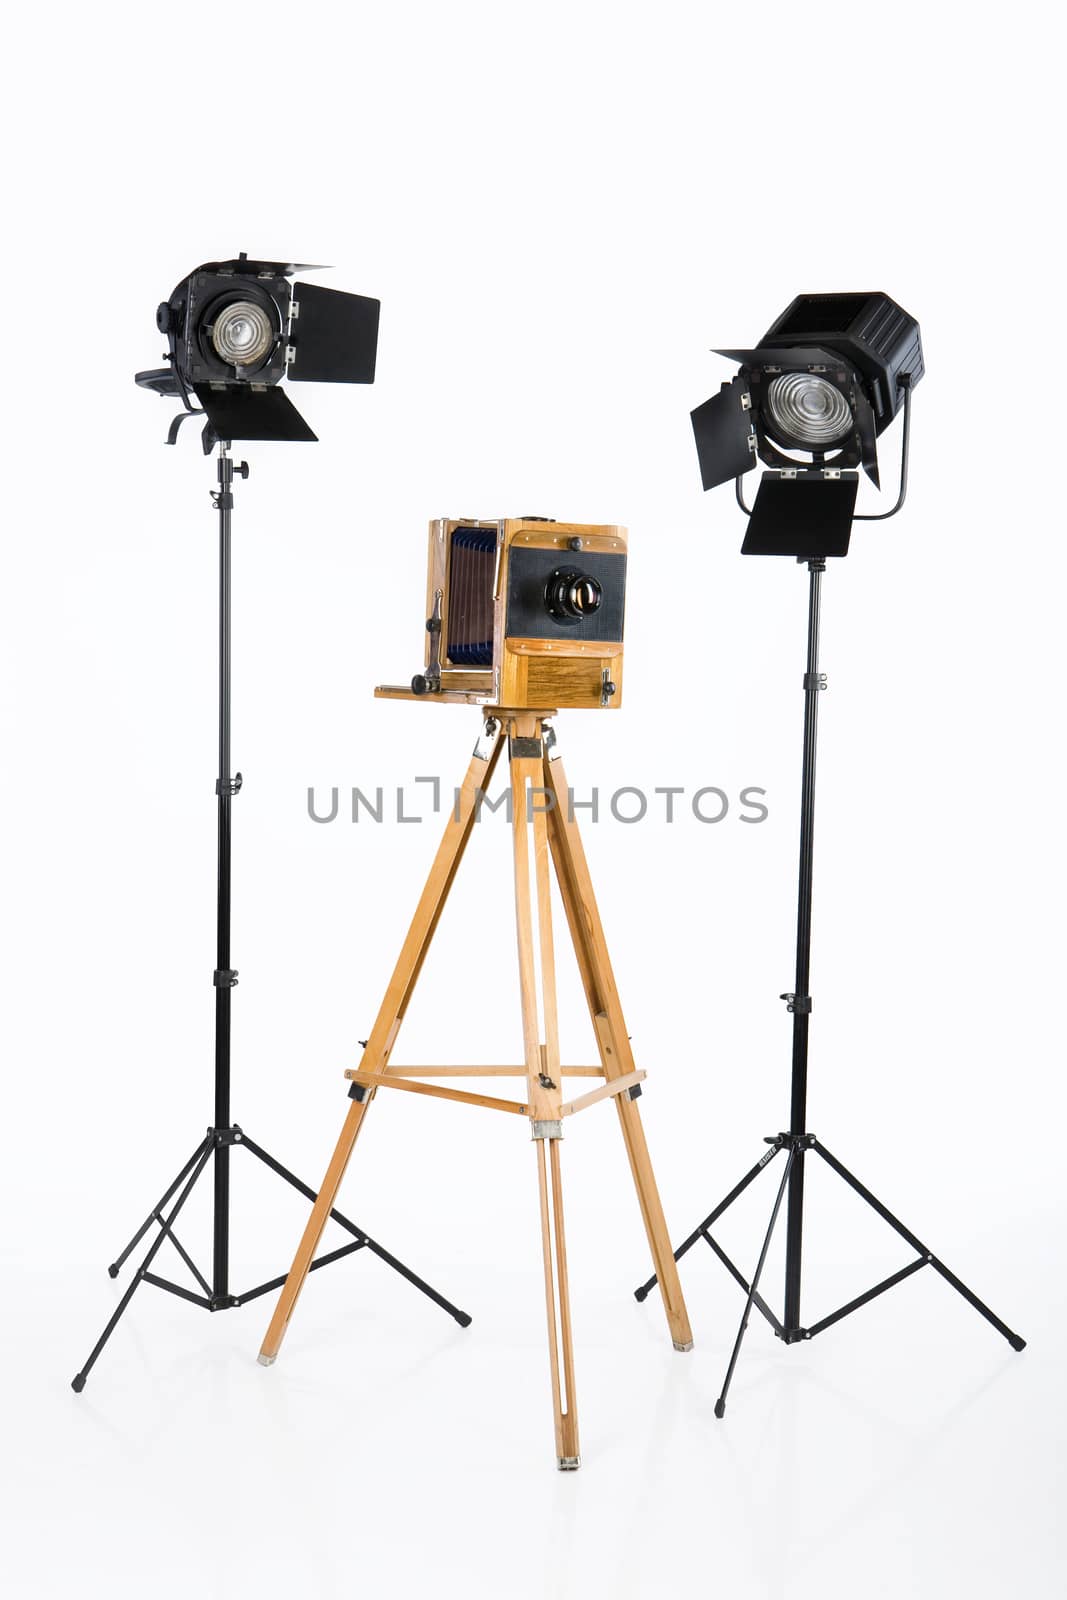 Old wooden photocamera and lighting